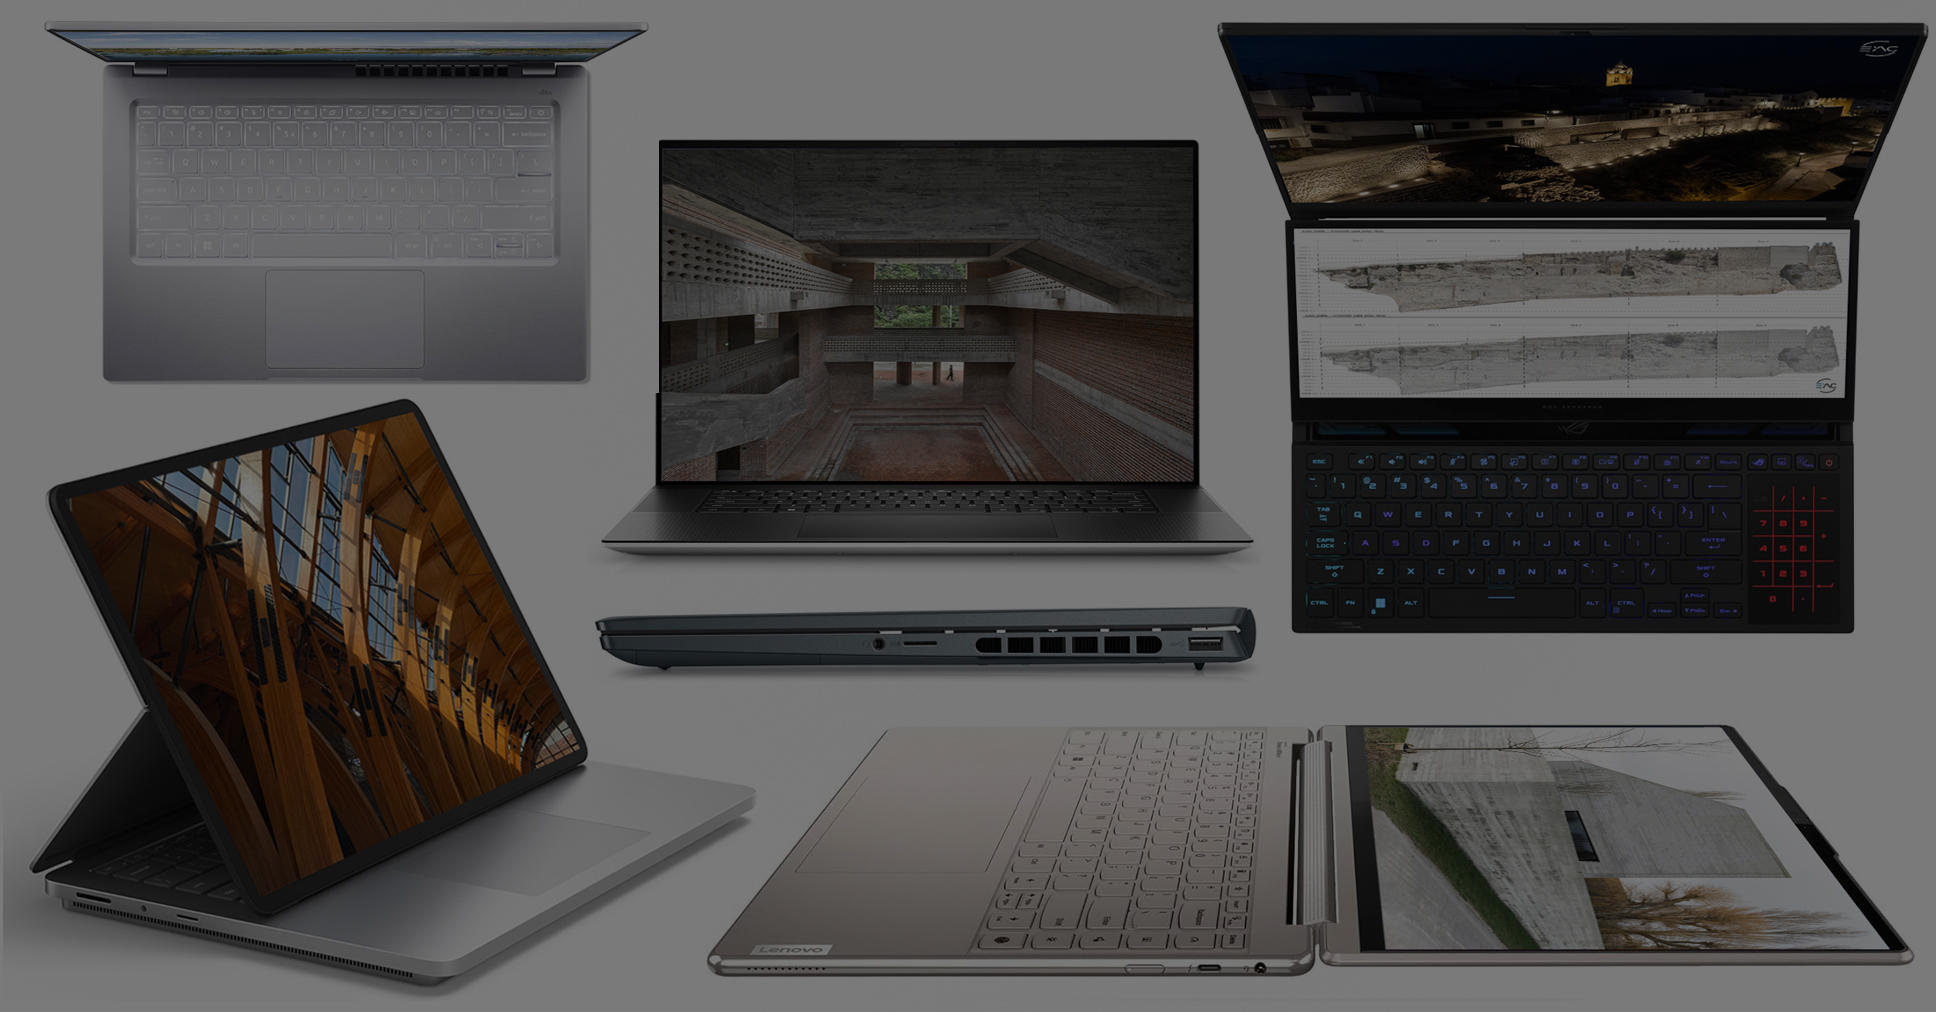 Yoga Slim Laptops, 2-in-1s, and All-in-One PCs